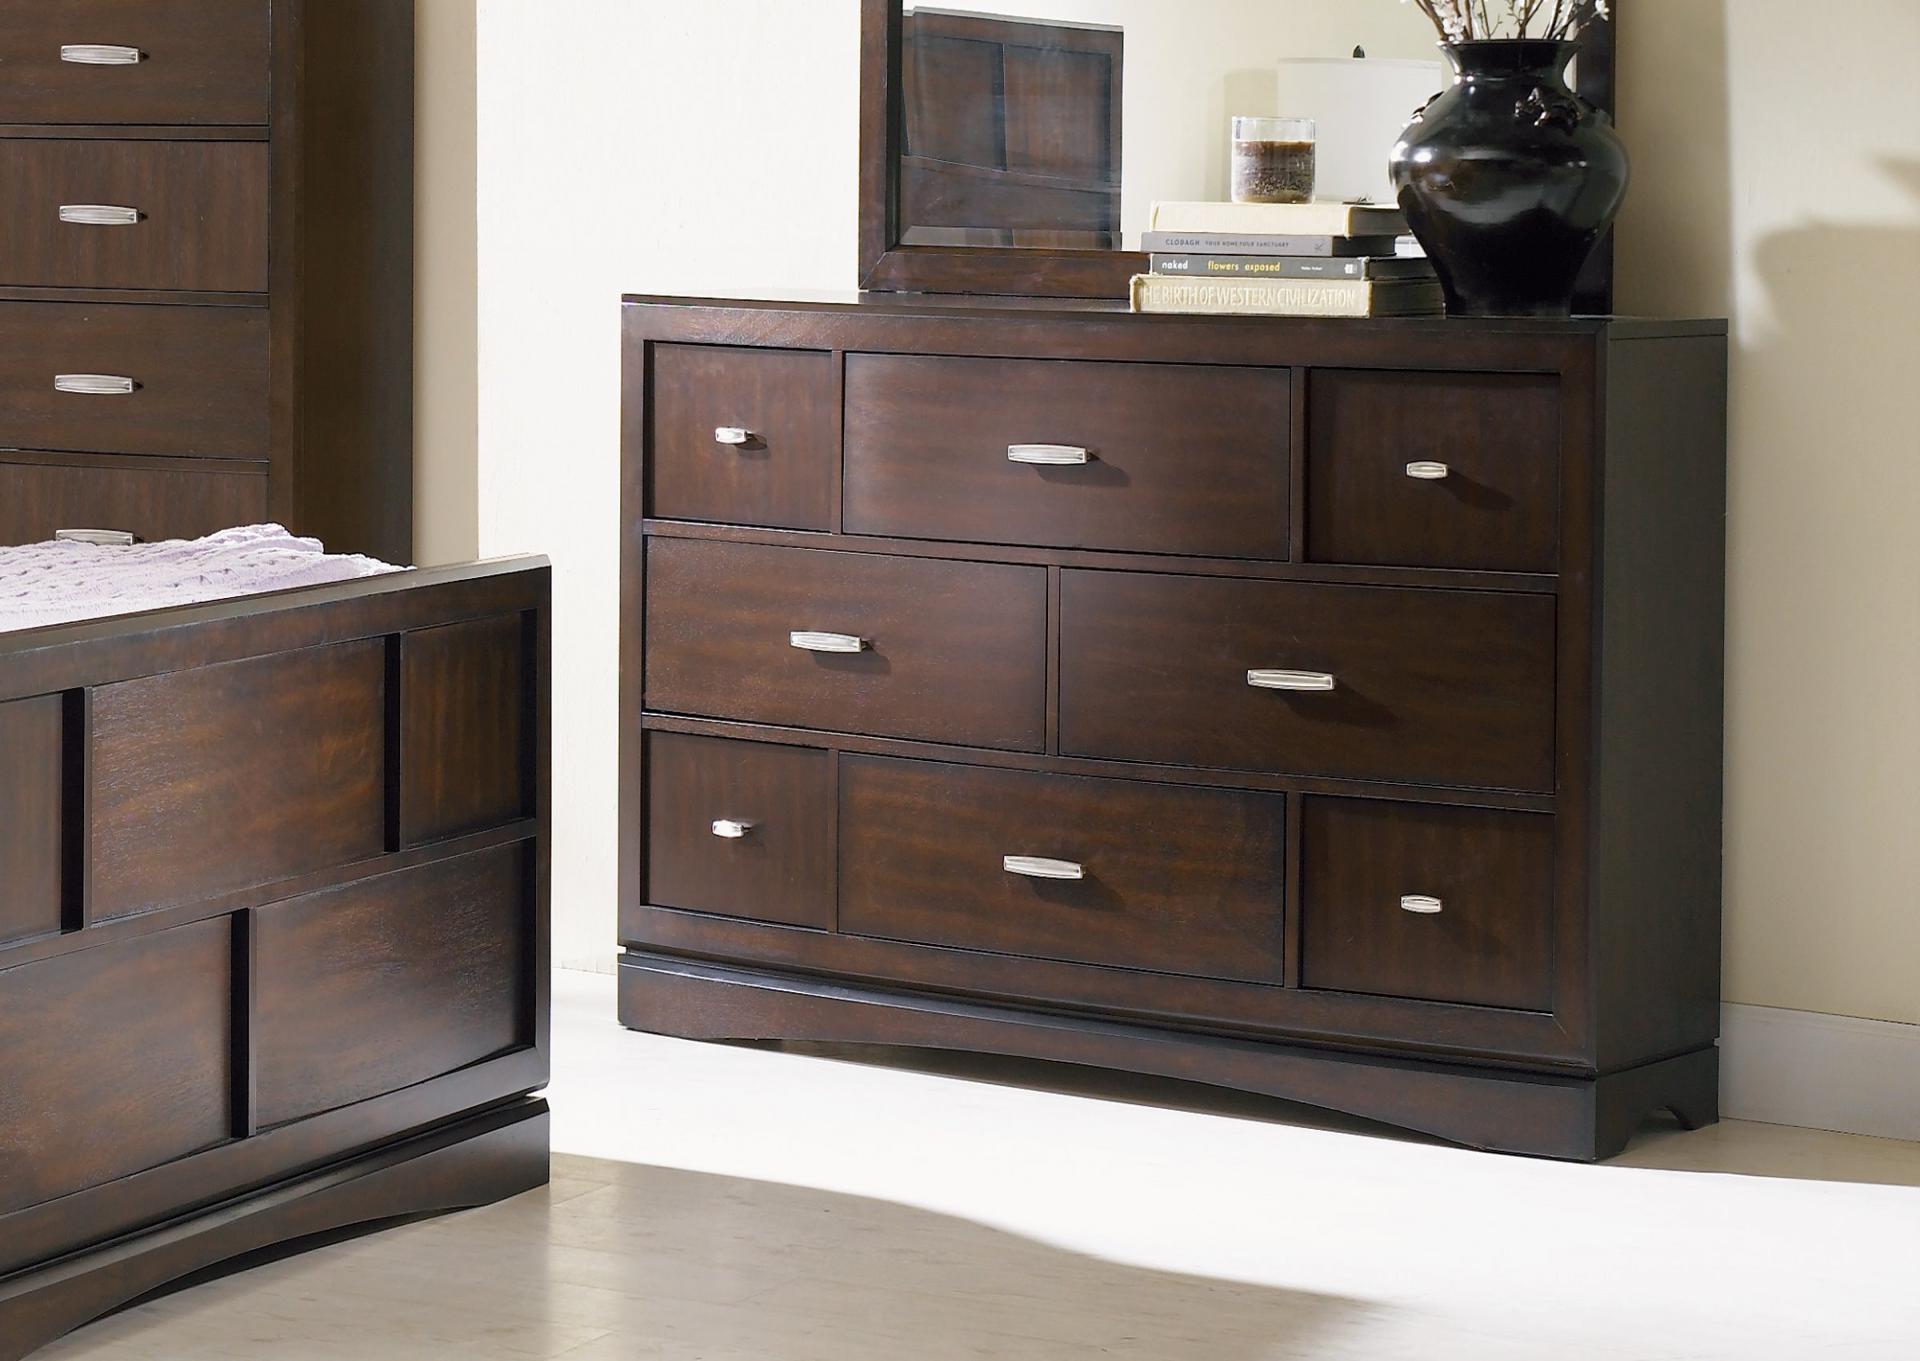 Brown Storage Bed with dresser mirror and nightstand